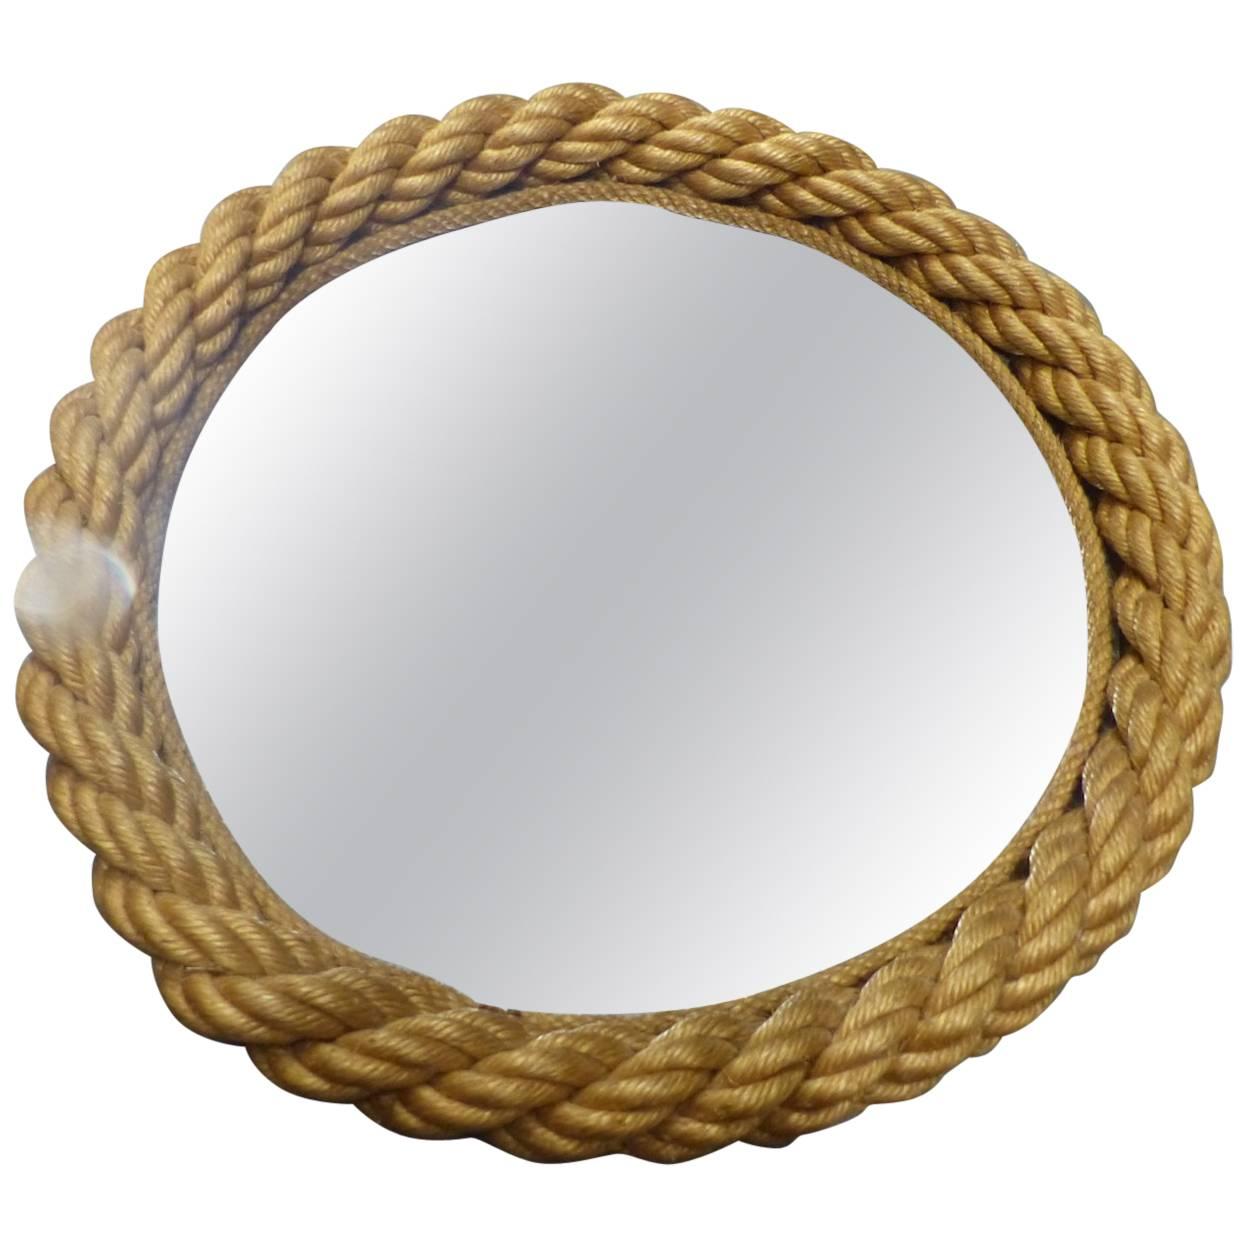 Beautiful Adrien Audoux and Frida Minet Rope Round Mirror, circa 1960 For Sale